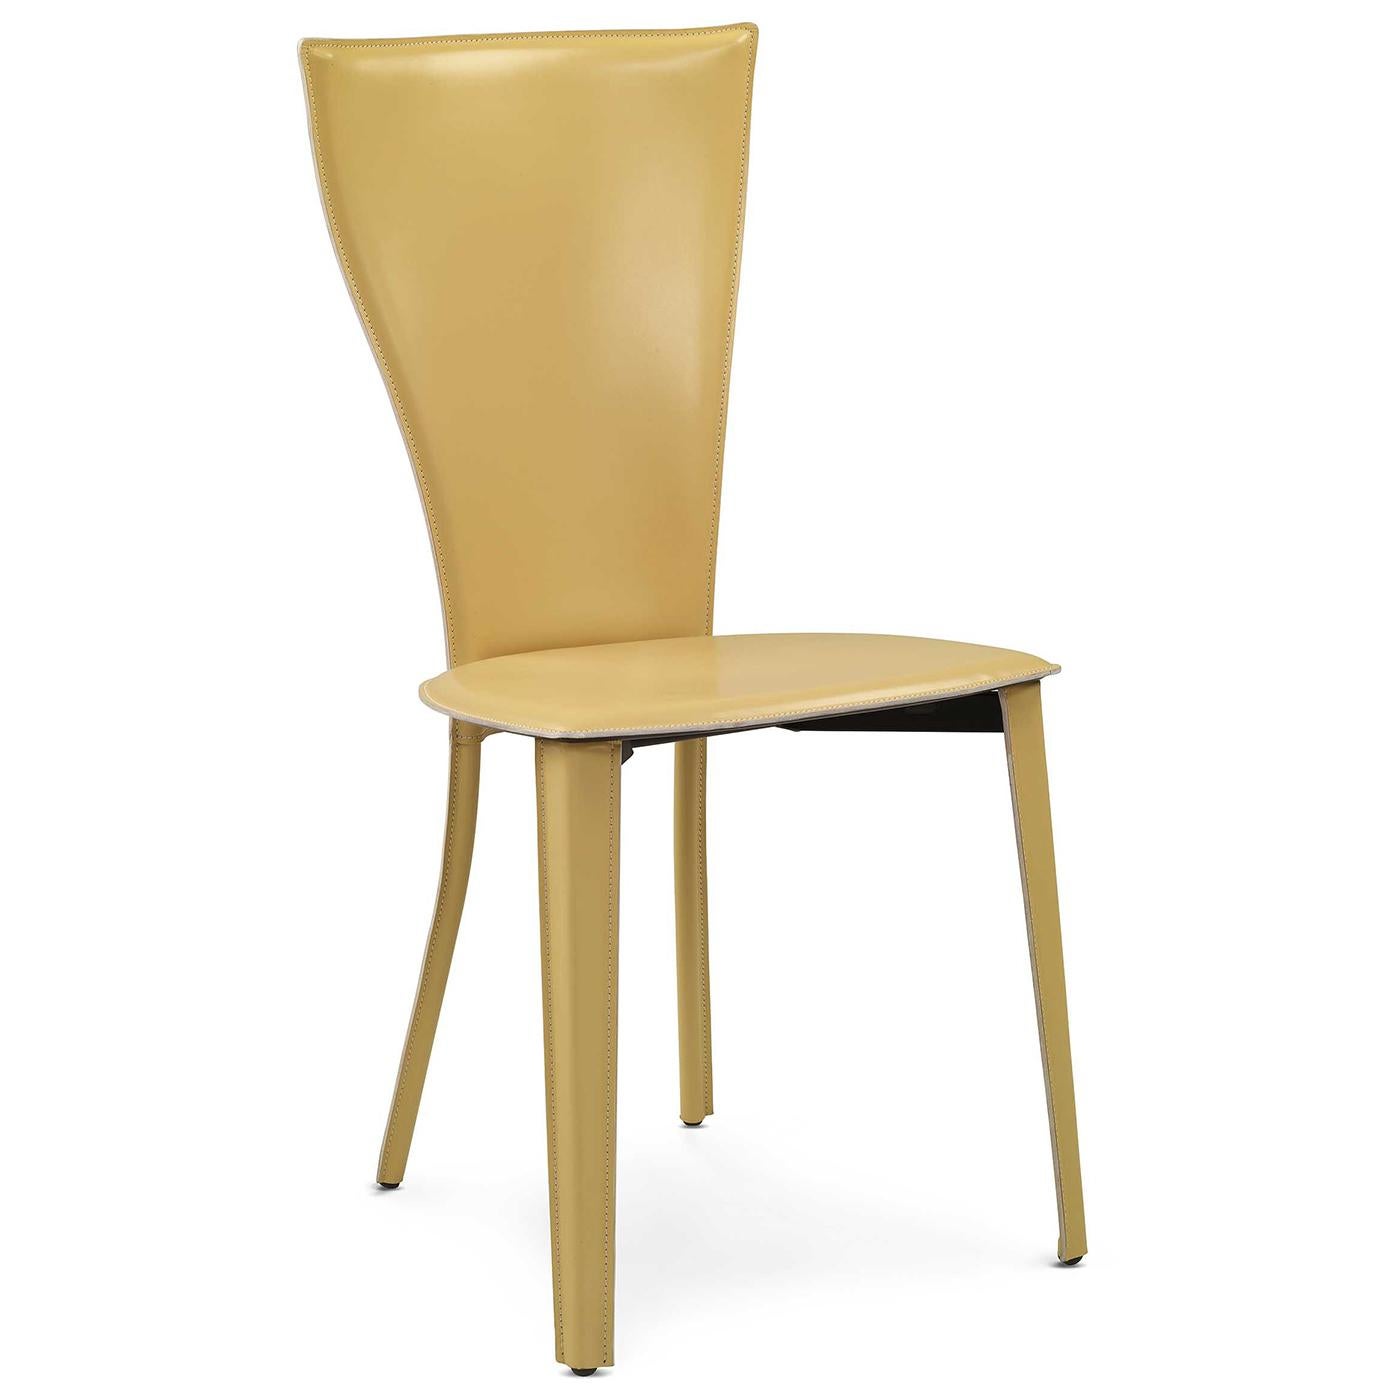 This four-legged, steel-framed chair is completely covered in rope-colored leather. The sinuous, embracing lines of its seat and back create a trendy silhouette, while the shape of its distinct high back is unique and sophisticated. This item can be